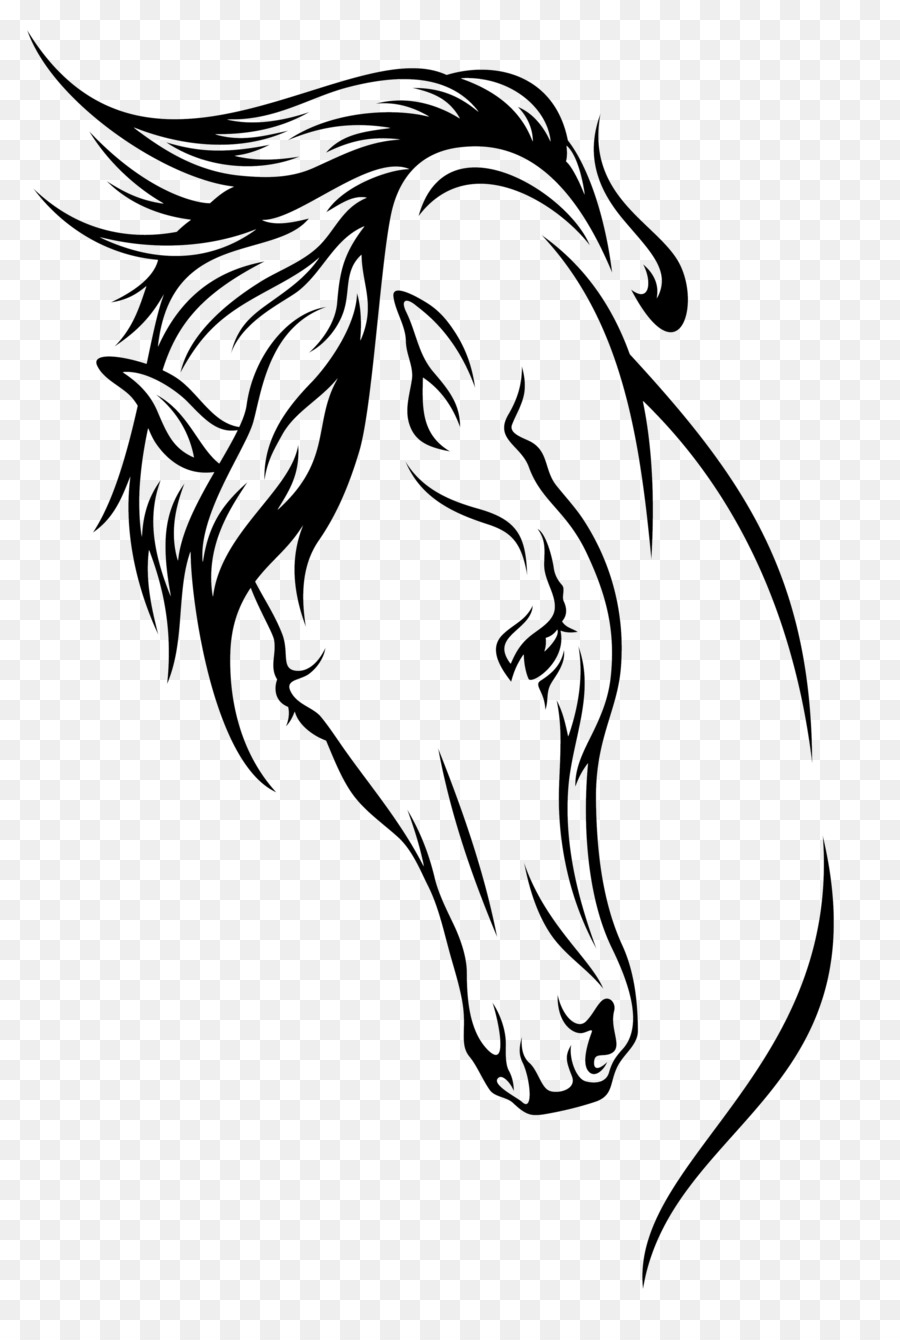 Horse Line Drawing Tattoo : The style seems to follow a set of rules ...